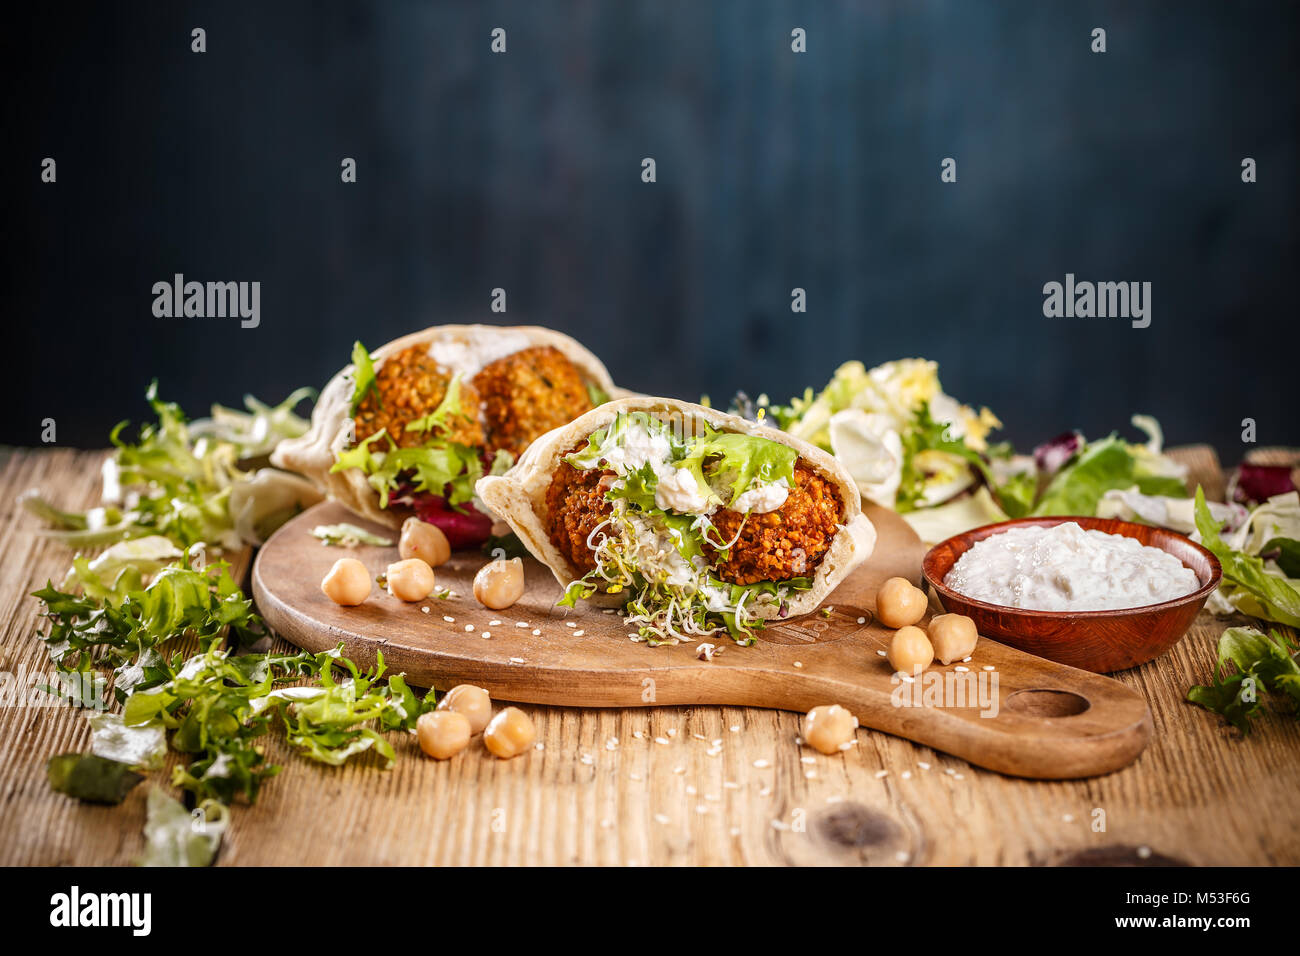 Falafel in pita bread. Tasty street food . Excellent choice for lunch or dinner. Stock Photo